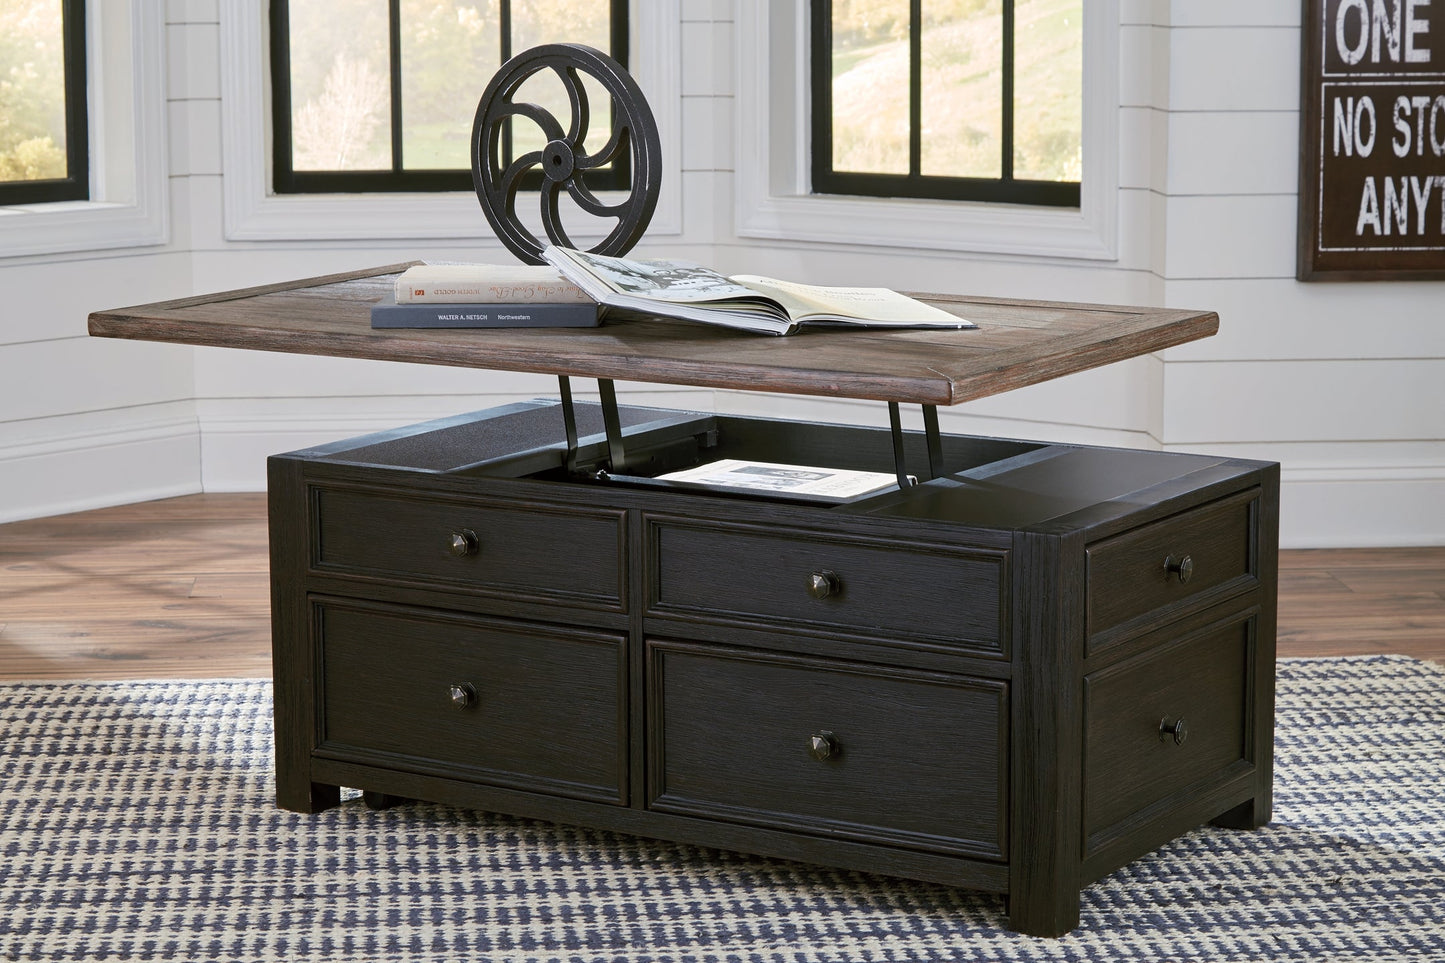 Tyler Creek Coffee Table with 1 End Table at Walker Mattress and Furniture Locations in Cedar Park and Belton TX.